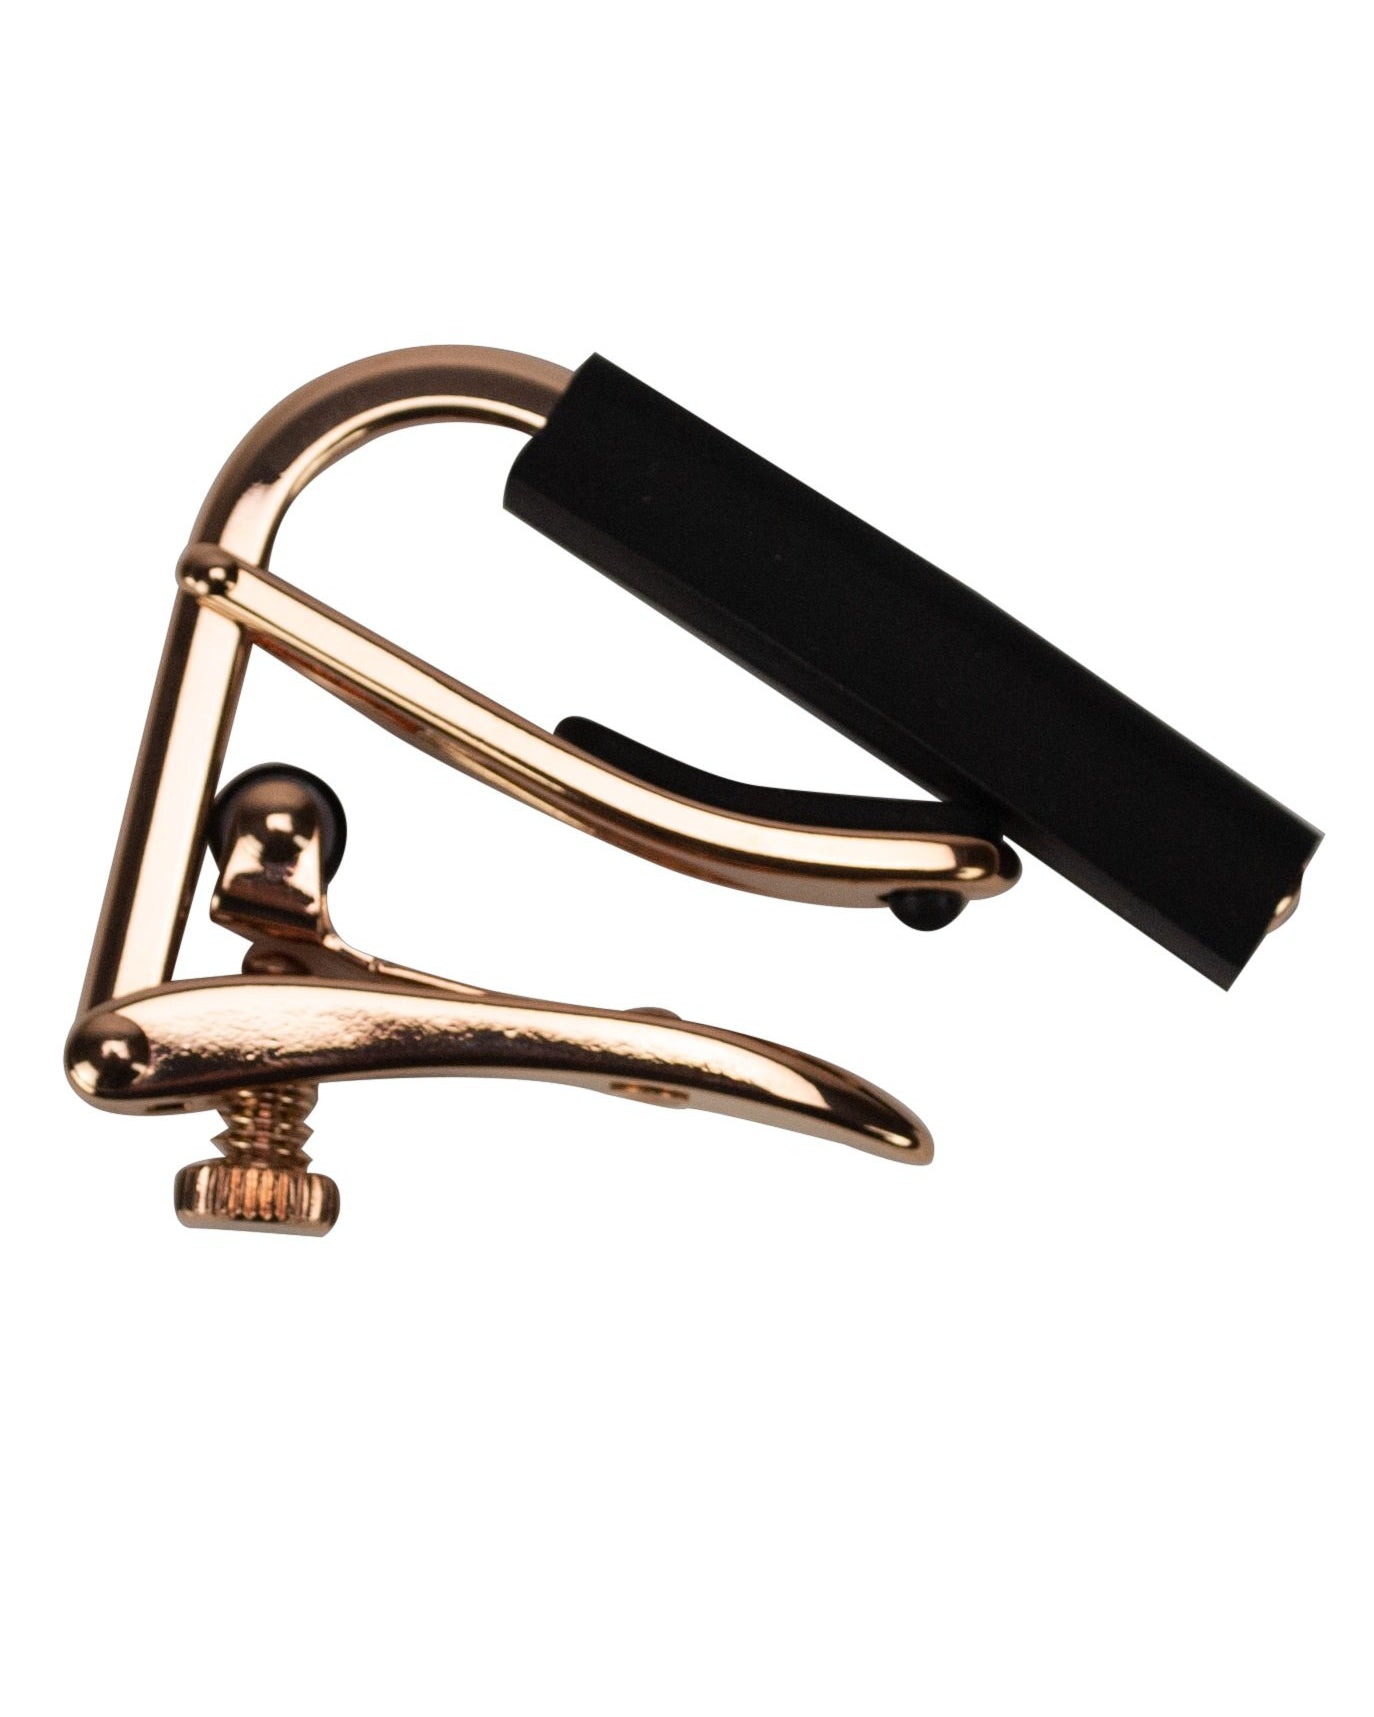 Image 1 of Shubb C1G Guitar Capo Royale, Rose Gold - SKU# C1GR : Product Type Accessories & Parts : Elderly Instruments